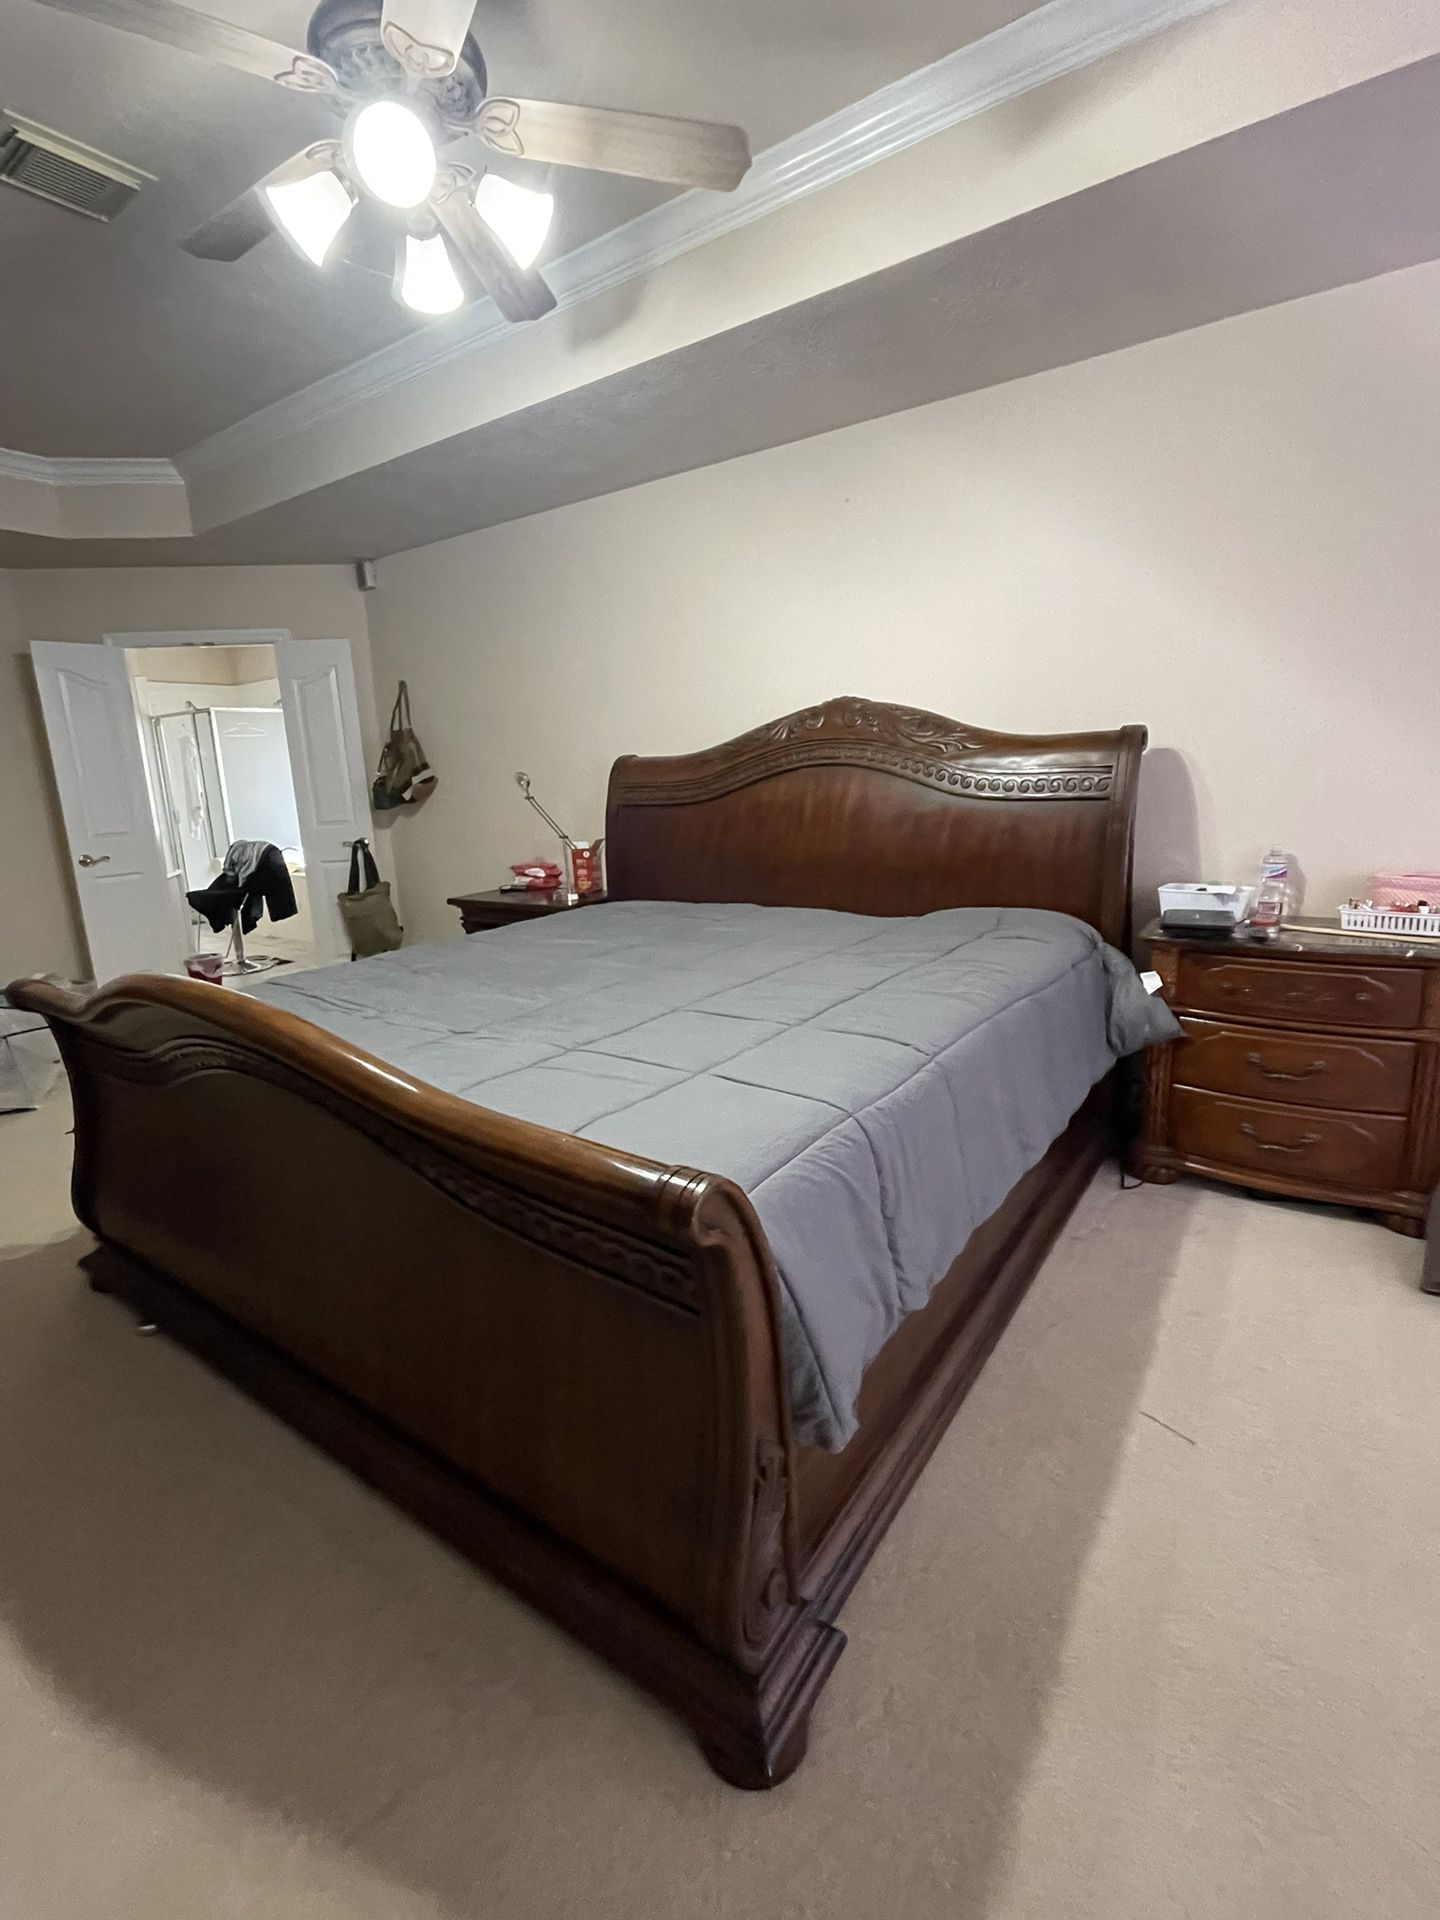 Moving Out Sale!  Great Deal - King Size - Sleigh Bedroom.   4 Piece S